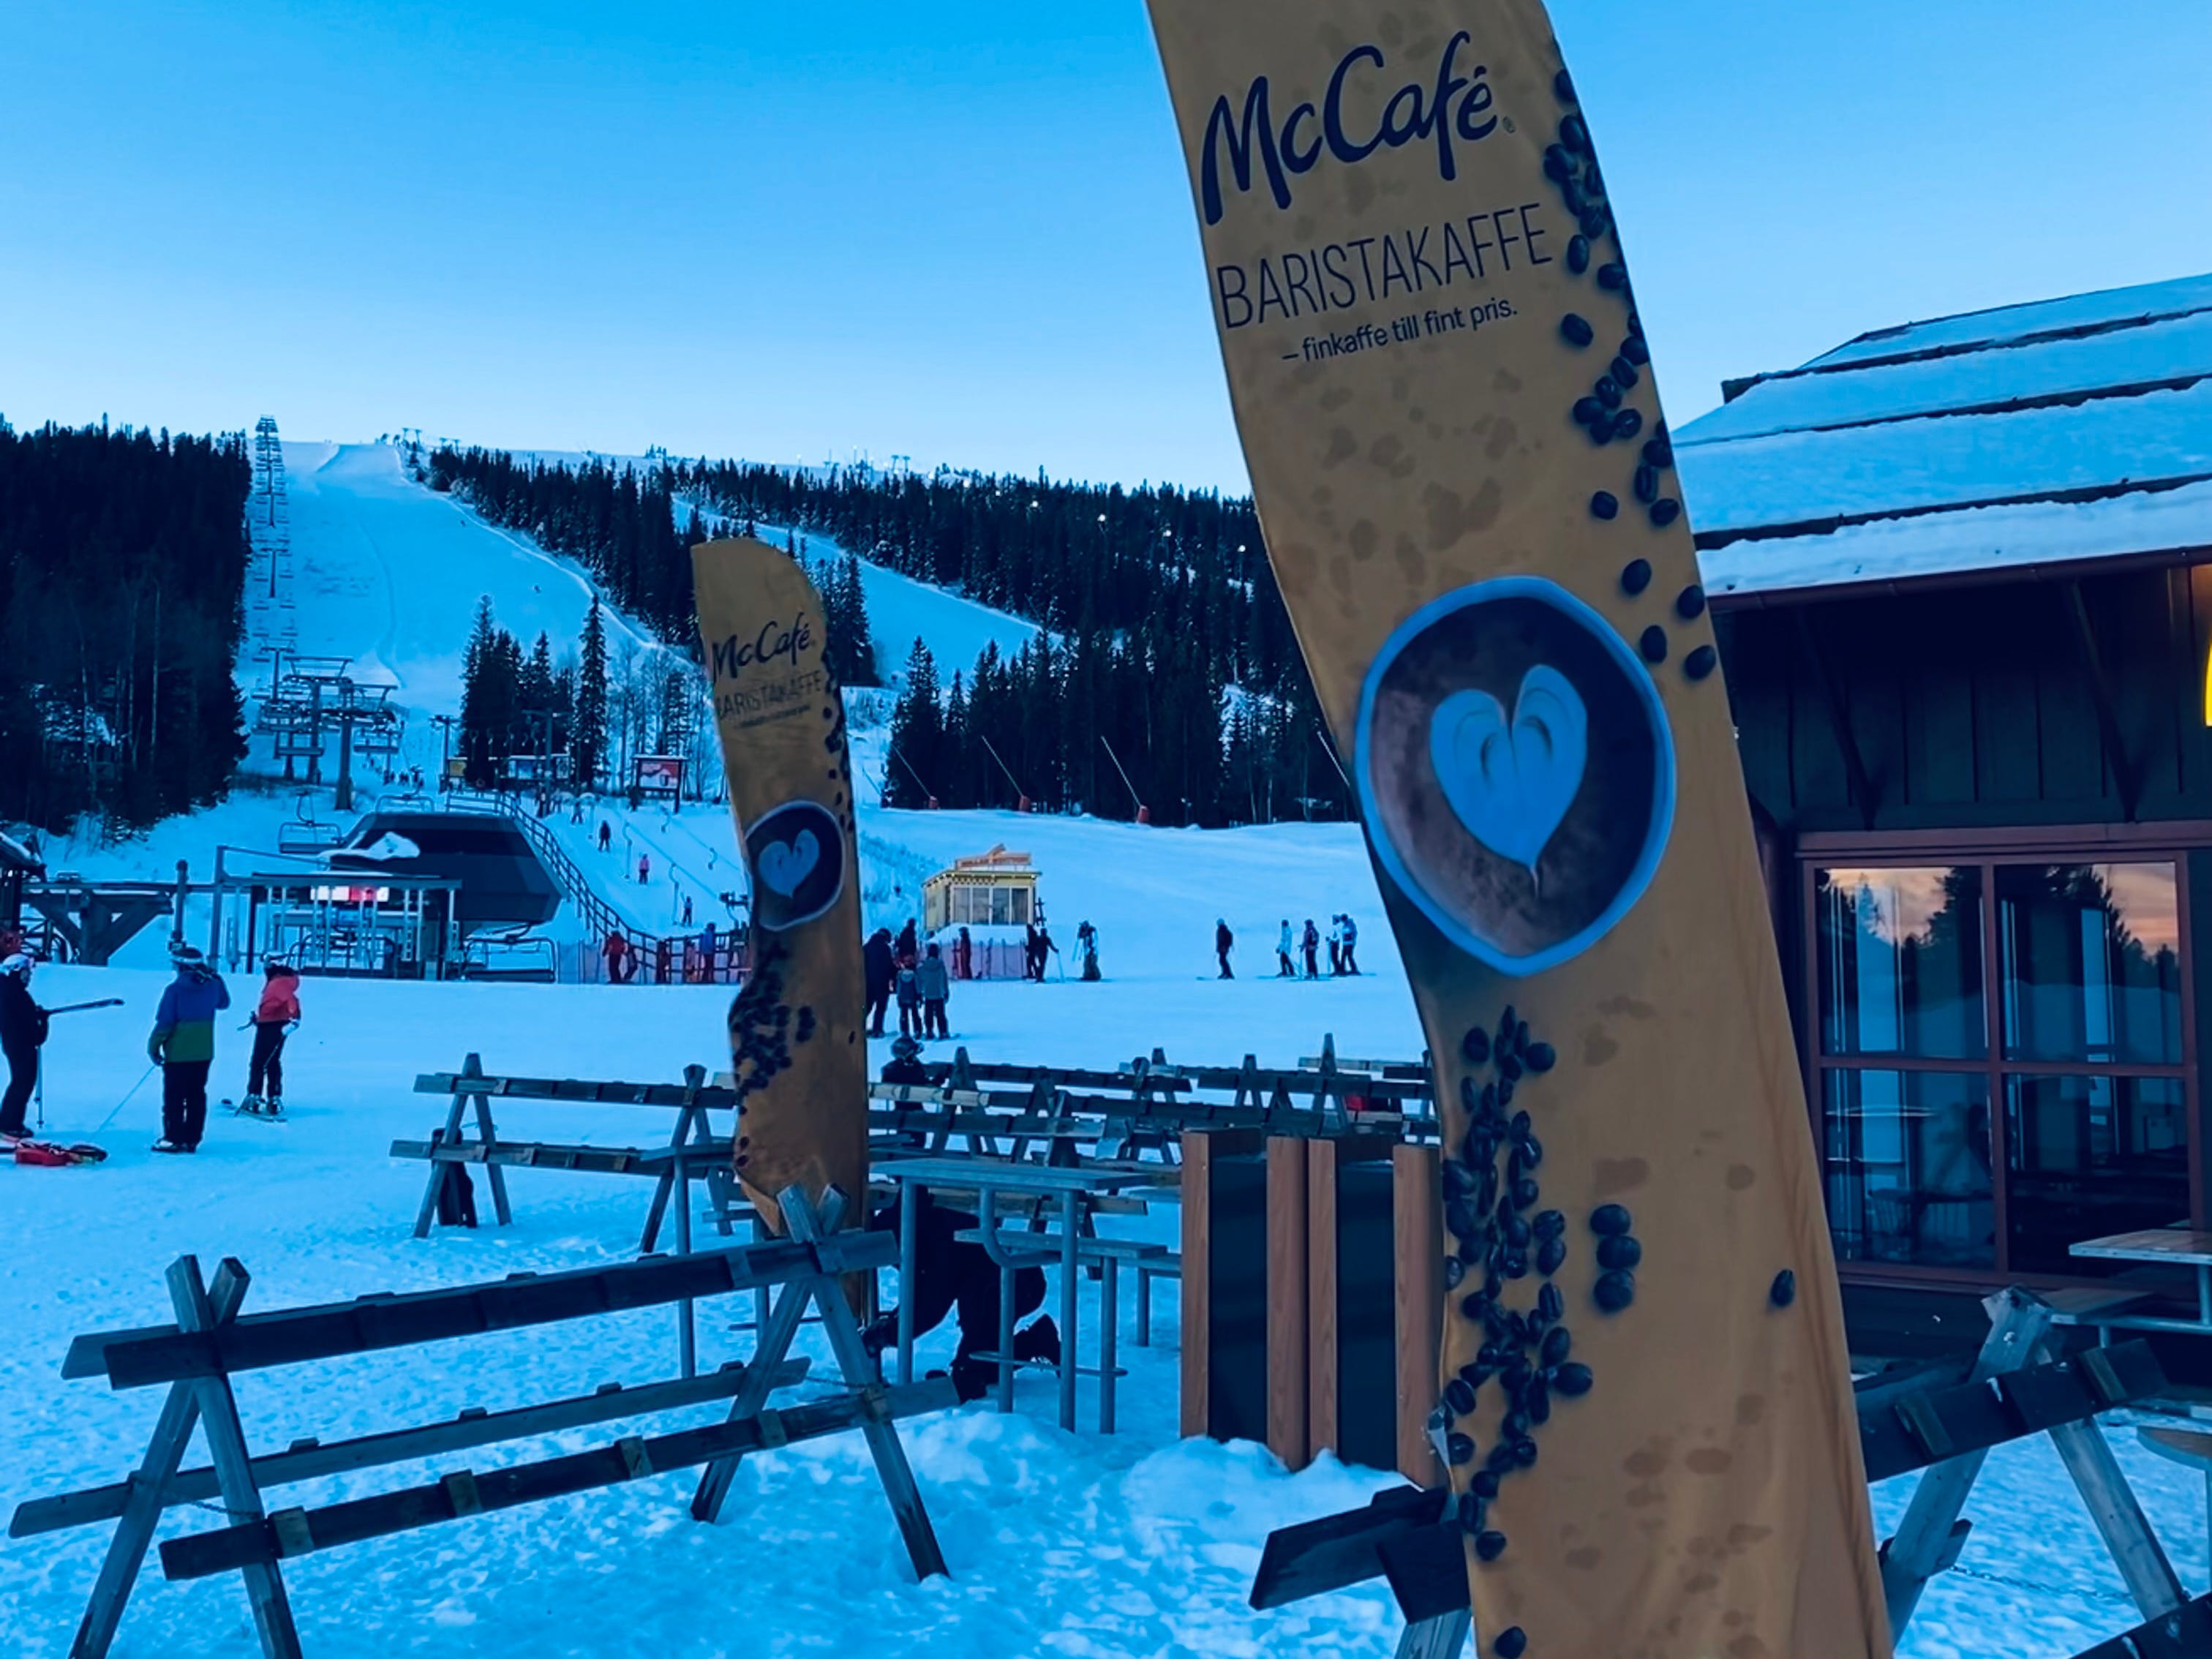 <p>The Telegraph's Richard Orange who <a href="https://www.telegraph.co.uk/travel/ski/inside-worlds-only-ski-through-mcdonalds-sweden-mcski/">recently visited the restaurant</a> said its decor mimics a Swedish hunting lodge, with a cowbell hanging from a pillar in the center.</p><p>Photos uploaded by reviewers on Google show wooden paneling on the walls and ceiling and rows of long tables and benches. The photos also show the restaurant adorned with framed artwork of animals, such as a bird, fox, and moose.</p><p>Large windows mean that customers can have views of the surrounding slopes and trees.</p><p>There are racks outside the restaurant for diners to store their skis, too.</p>